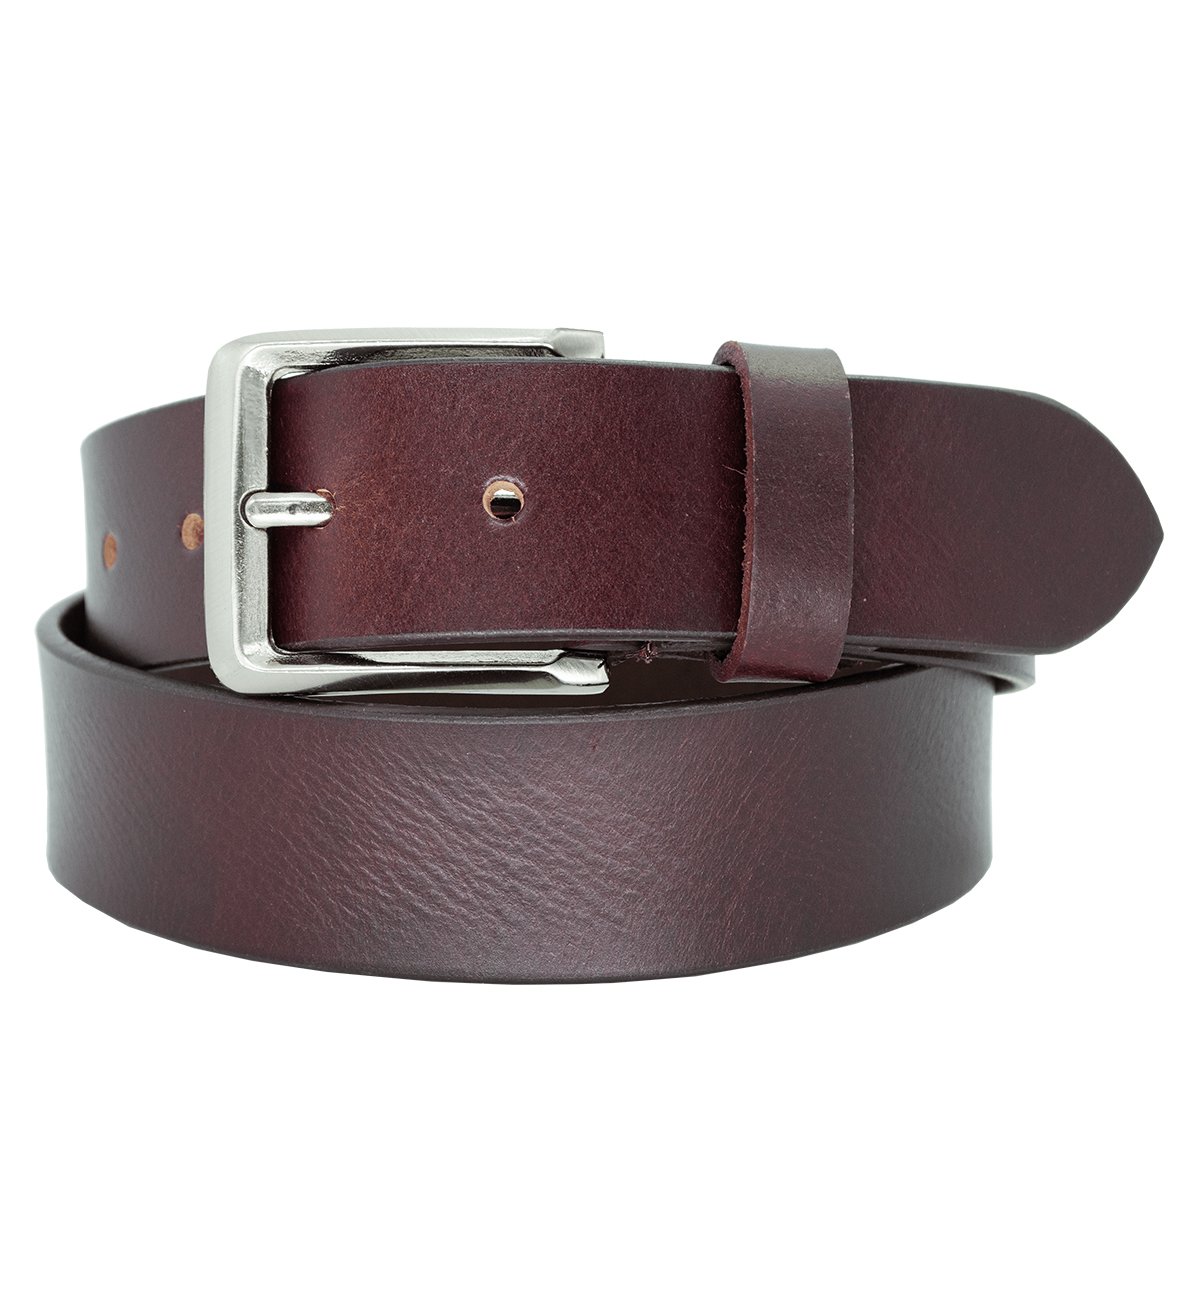 Men's Casual Genuine Leather Belt with Heavy Silver Buckle - #BT-1603